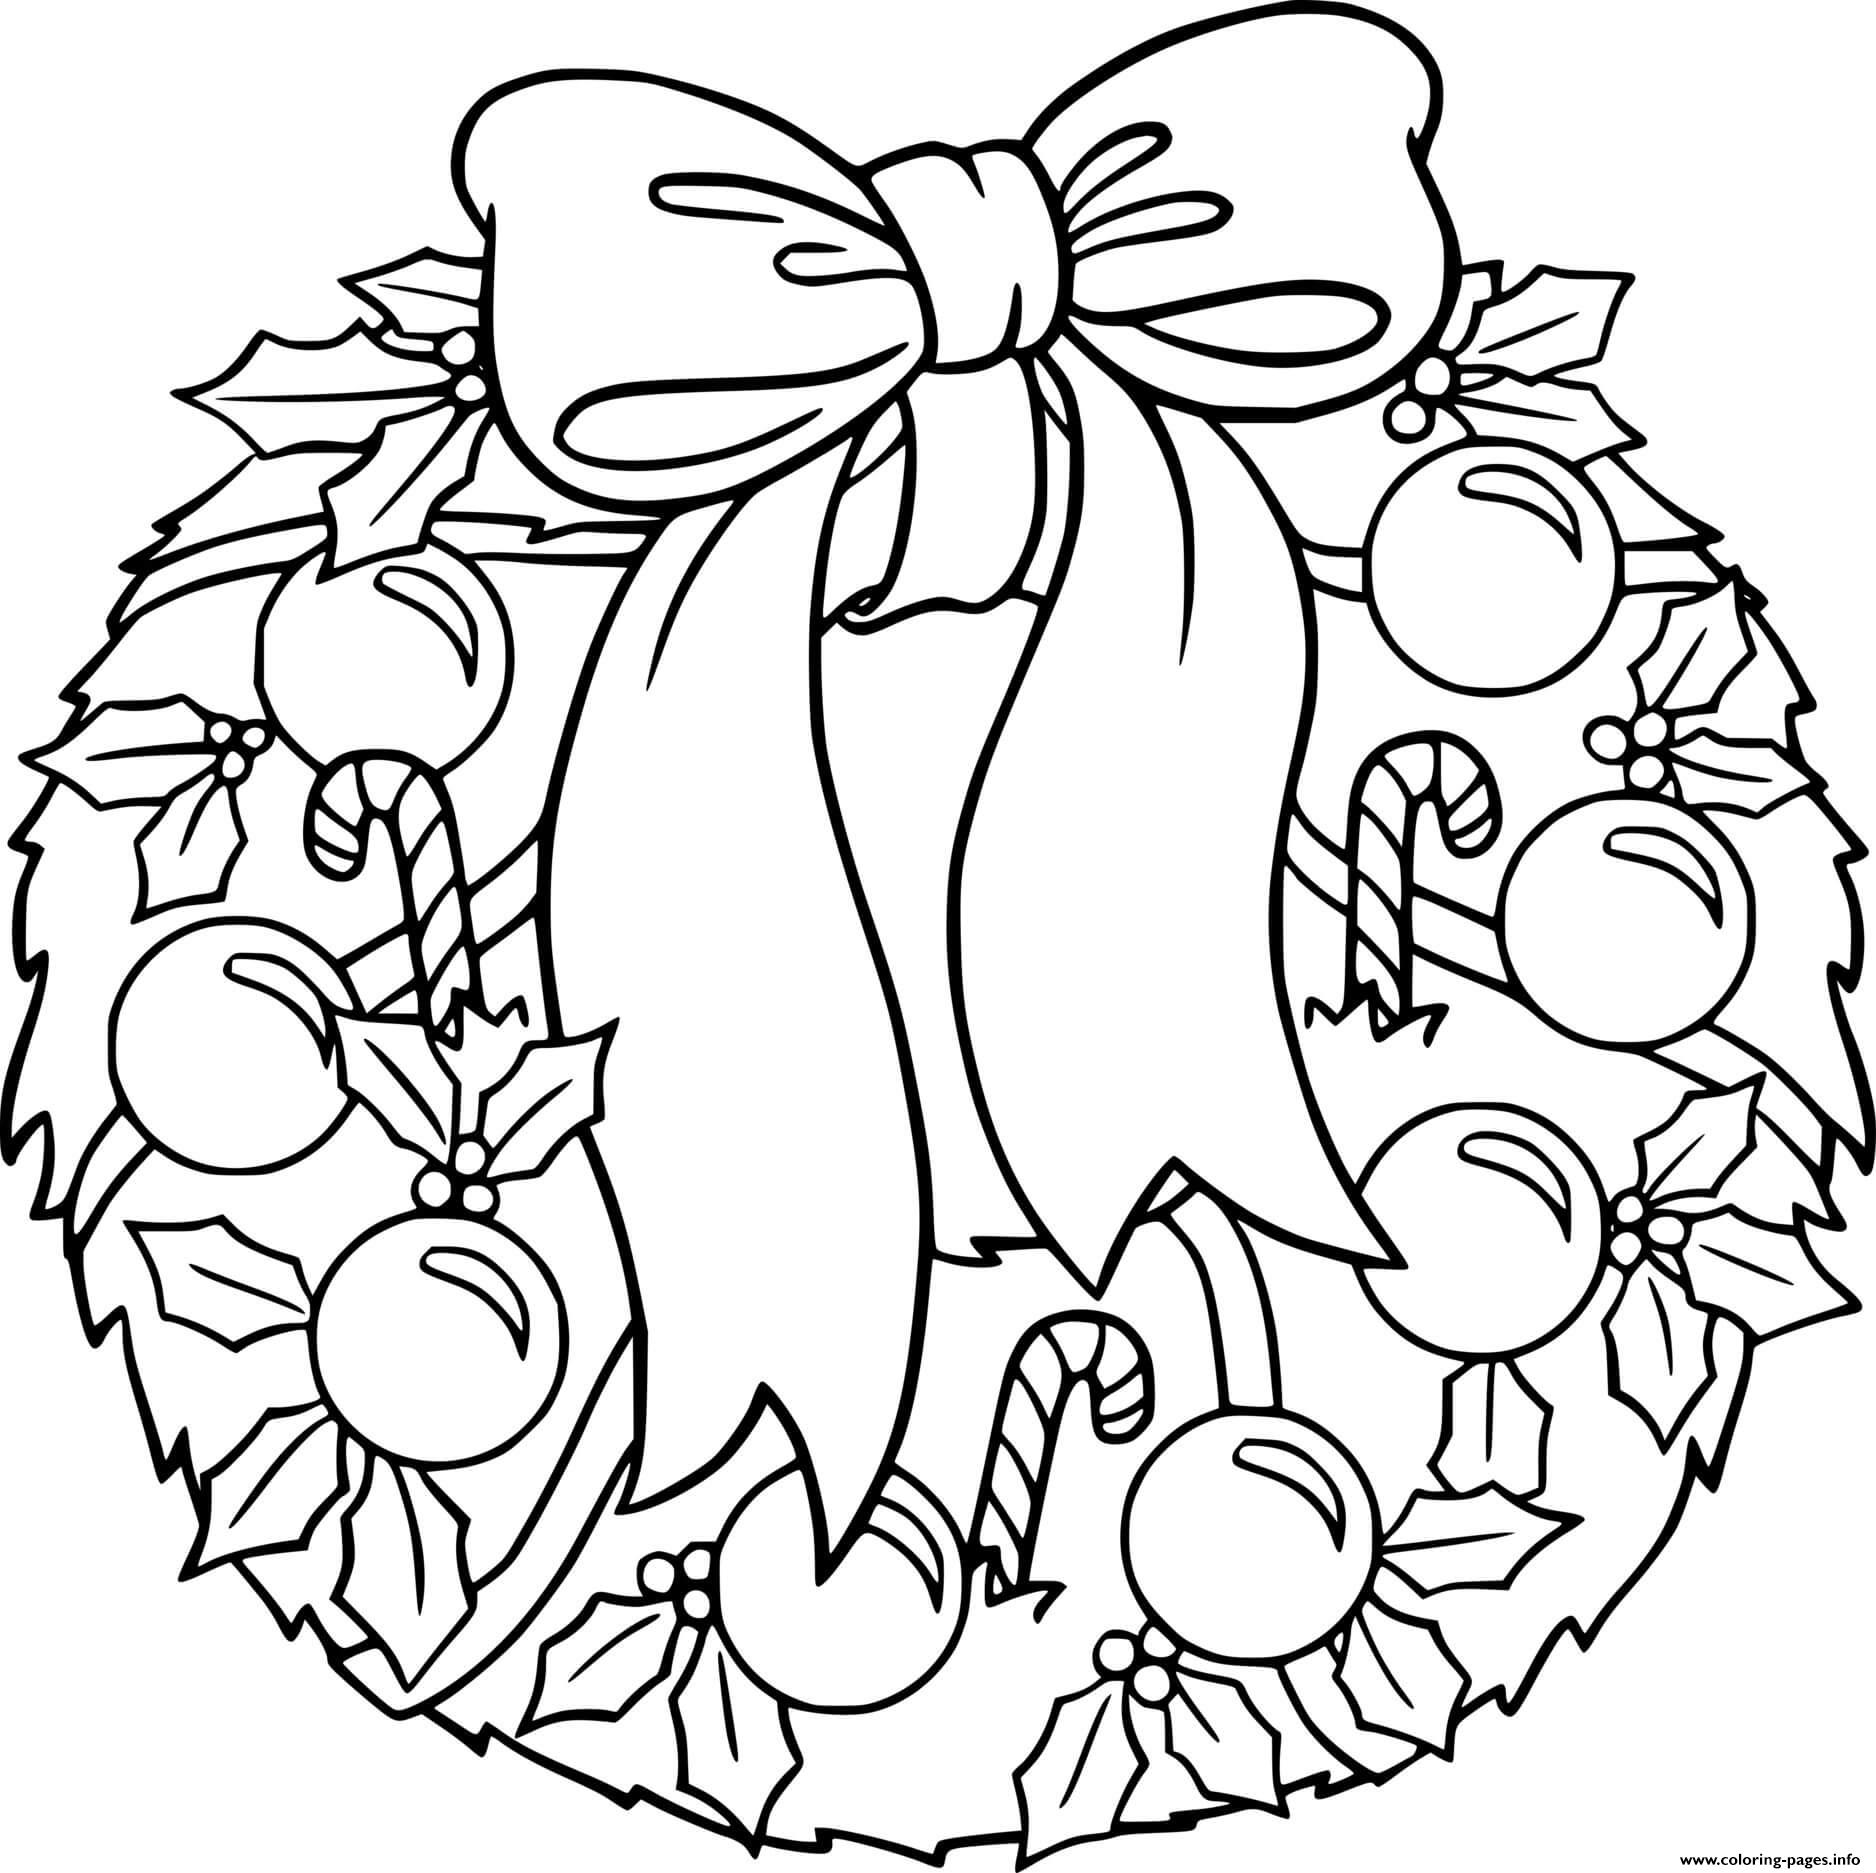 Christmas Wreath With Candy Canes coloring